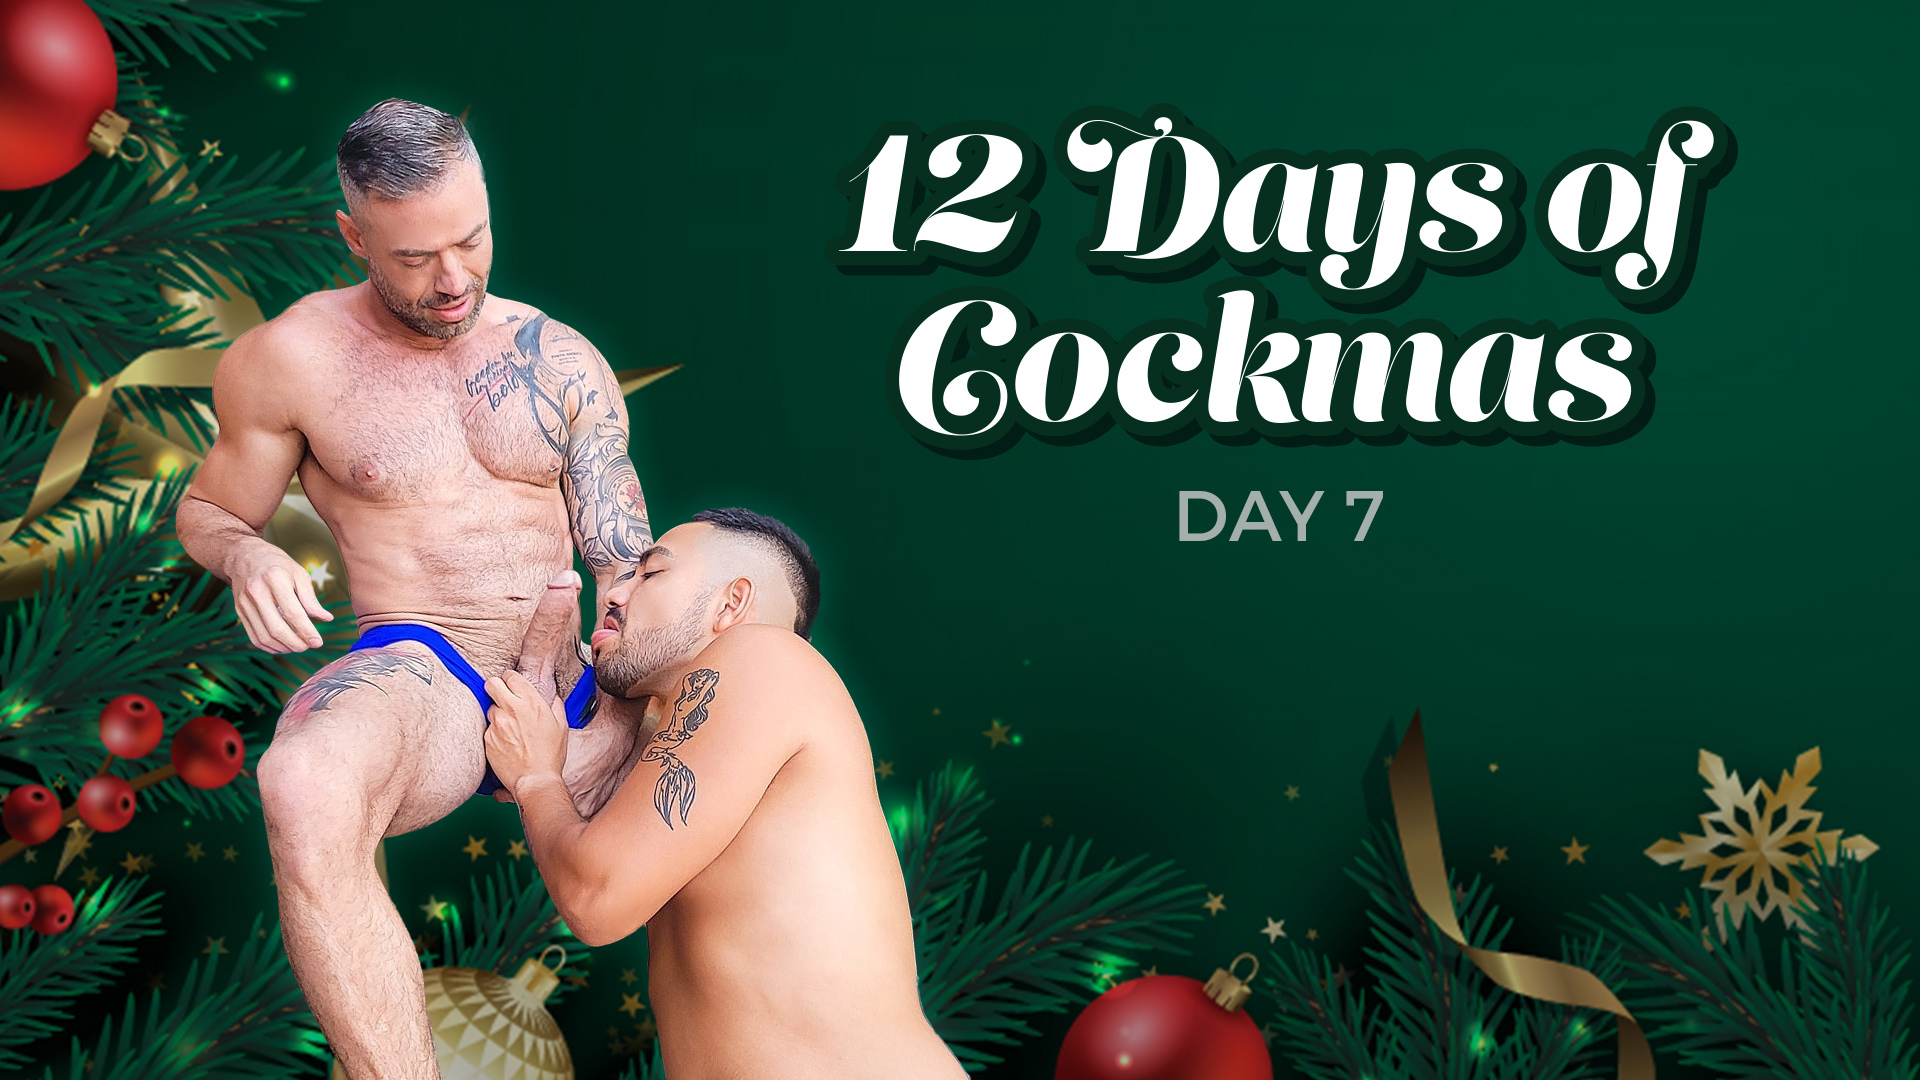 It’s the Seventh Day of Cockmas! Enter Now for a Chance to Win!